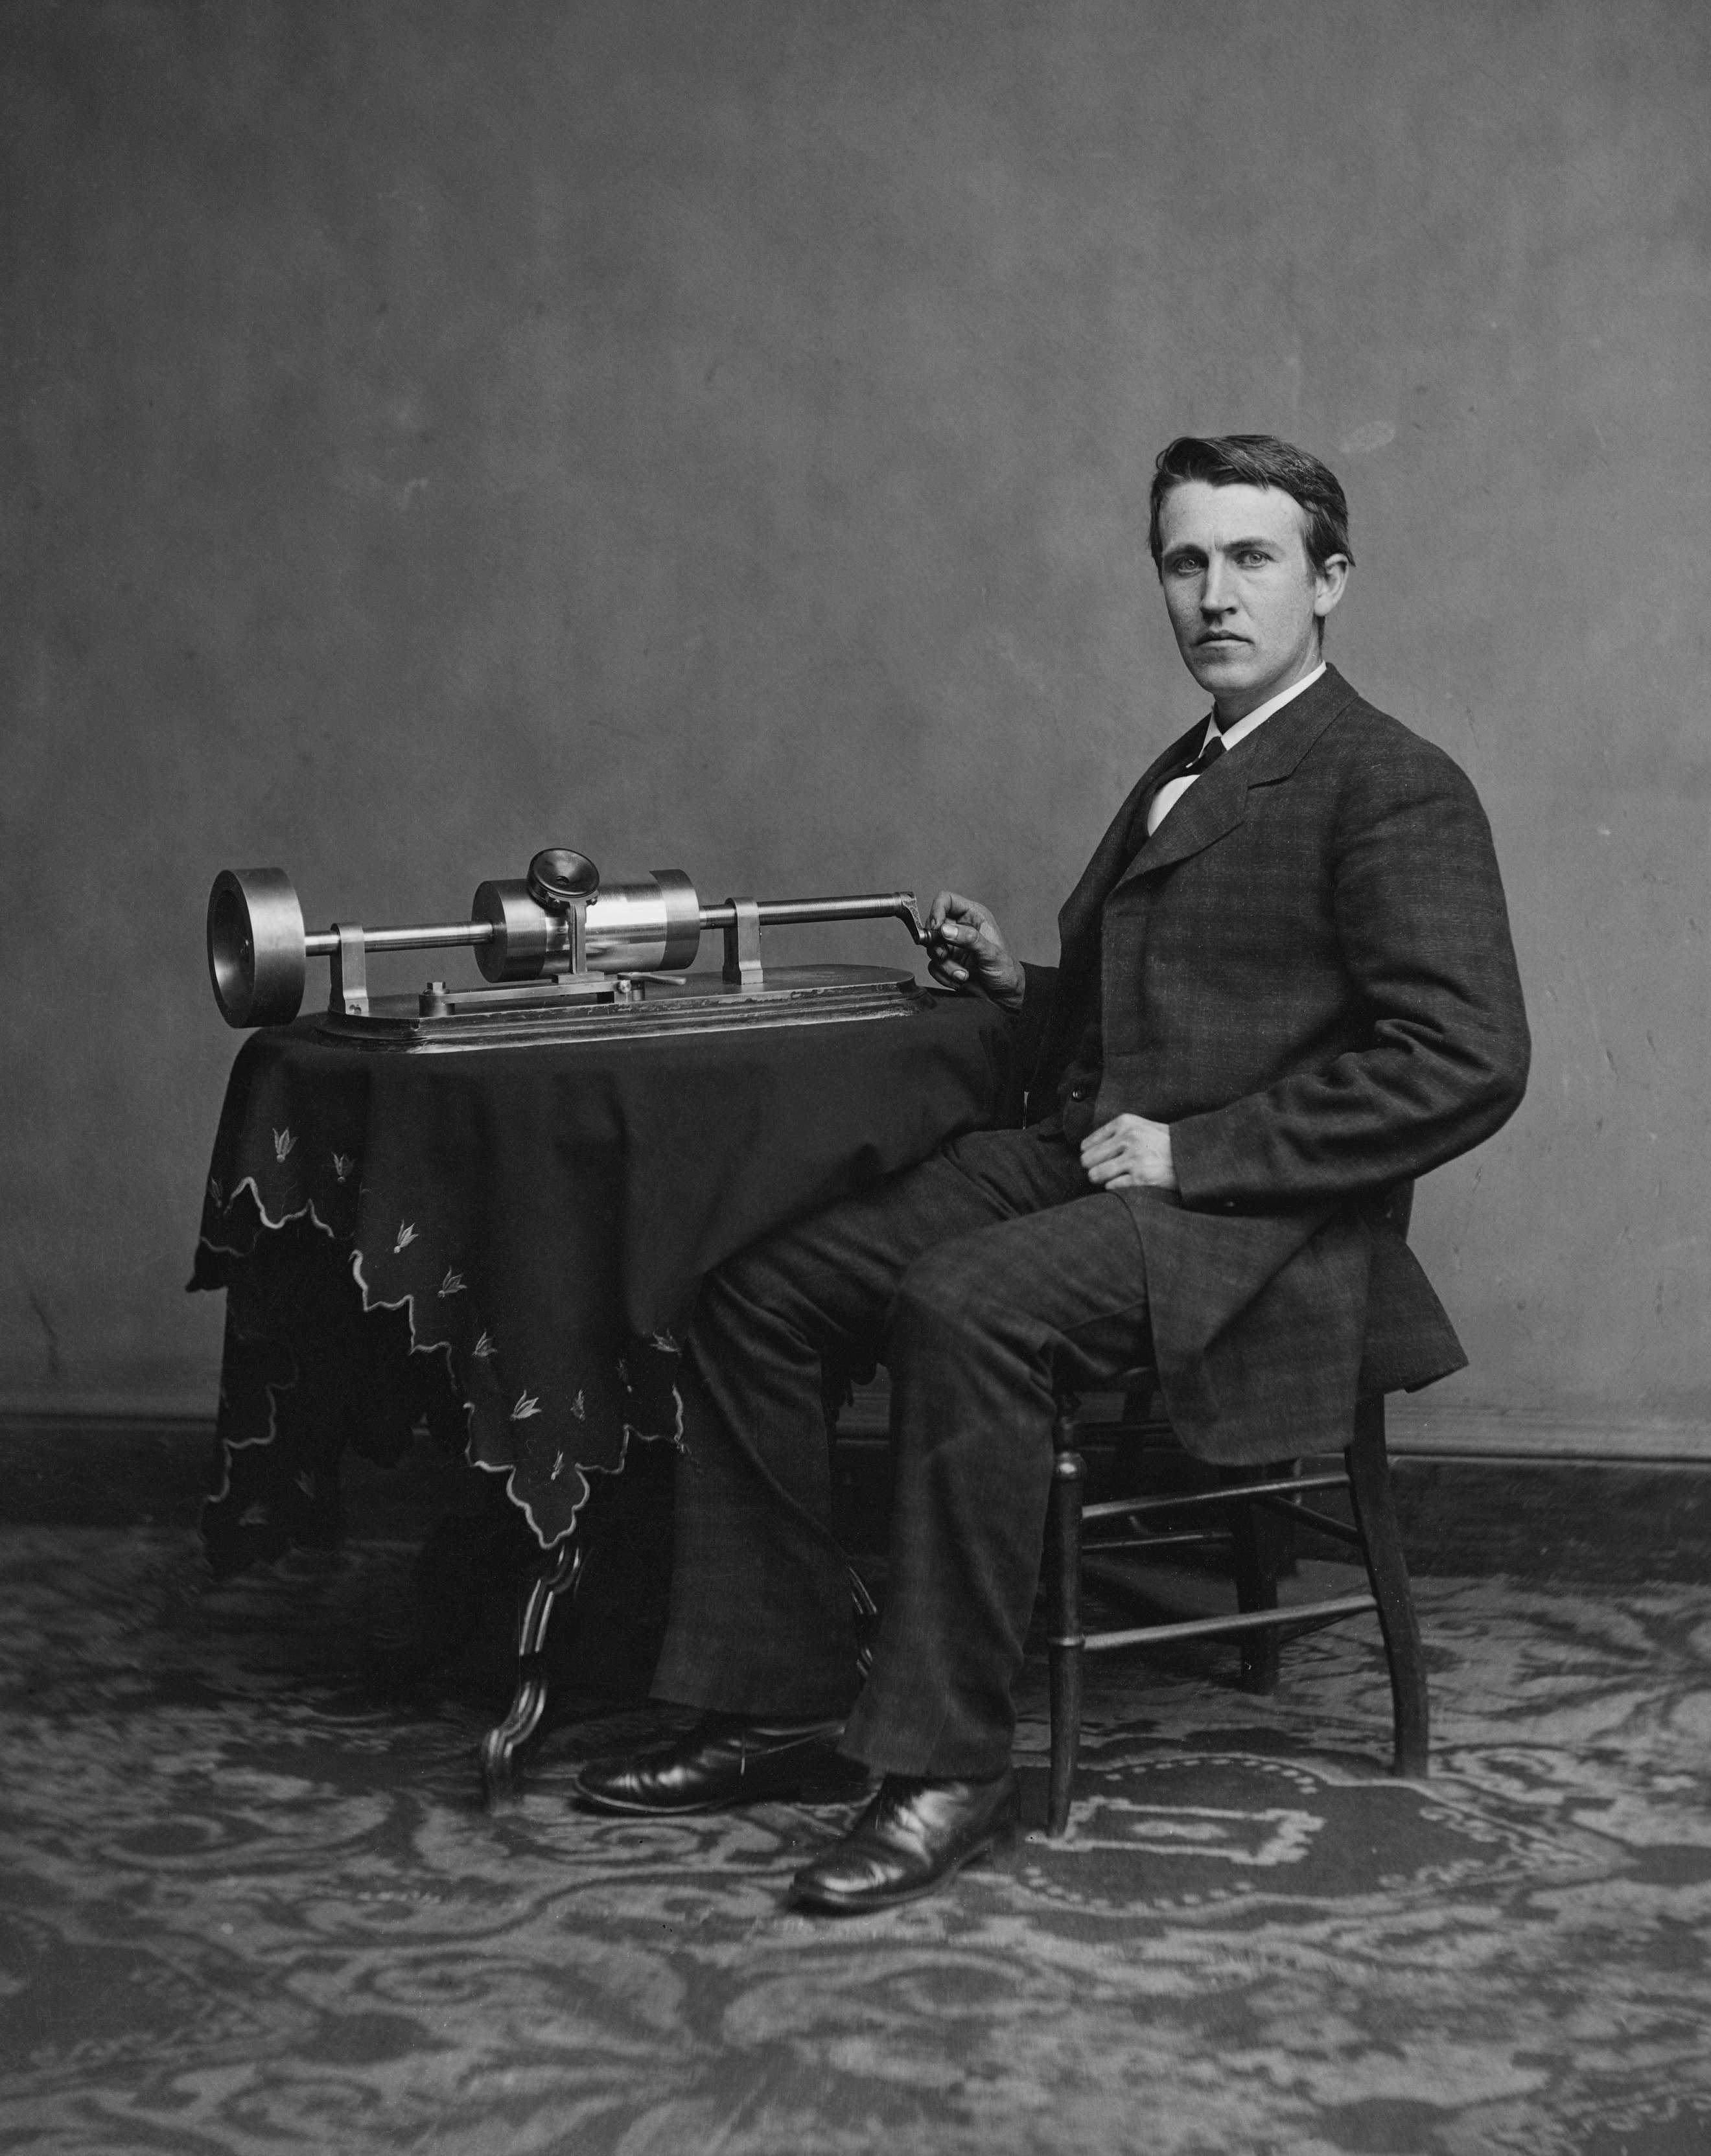 Edison with his phonograph (2nd model), taken in Mathew Brady's Washington, D.C. studio by Levin C. Handy likely on April 18, 1878. Currently in the Brady-Handy Photograph Collection of the Library of Congress, Washington, D.C. Reproduction Number: LC-DIG-cwpbh-04326 (digital file from original negative)